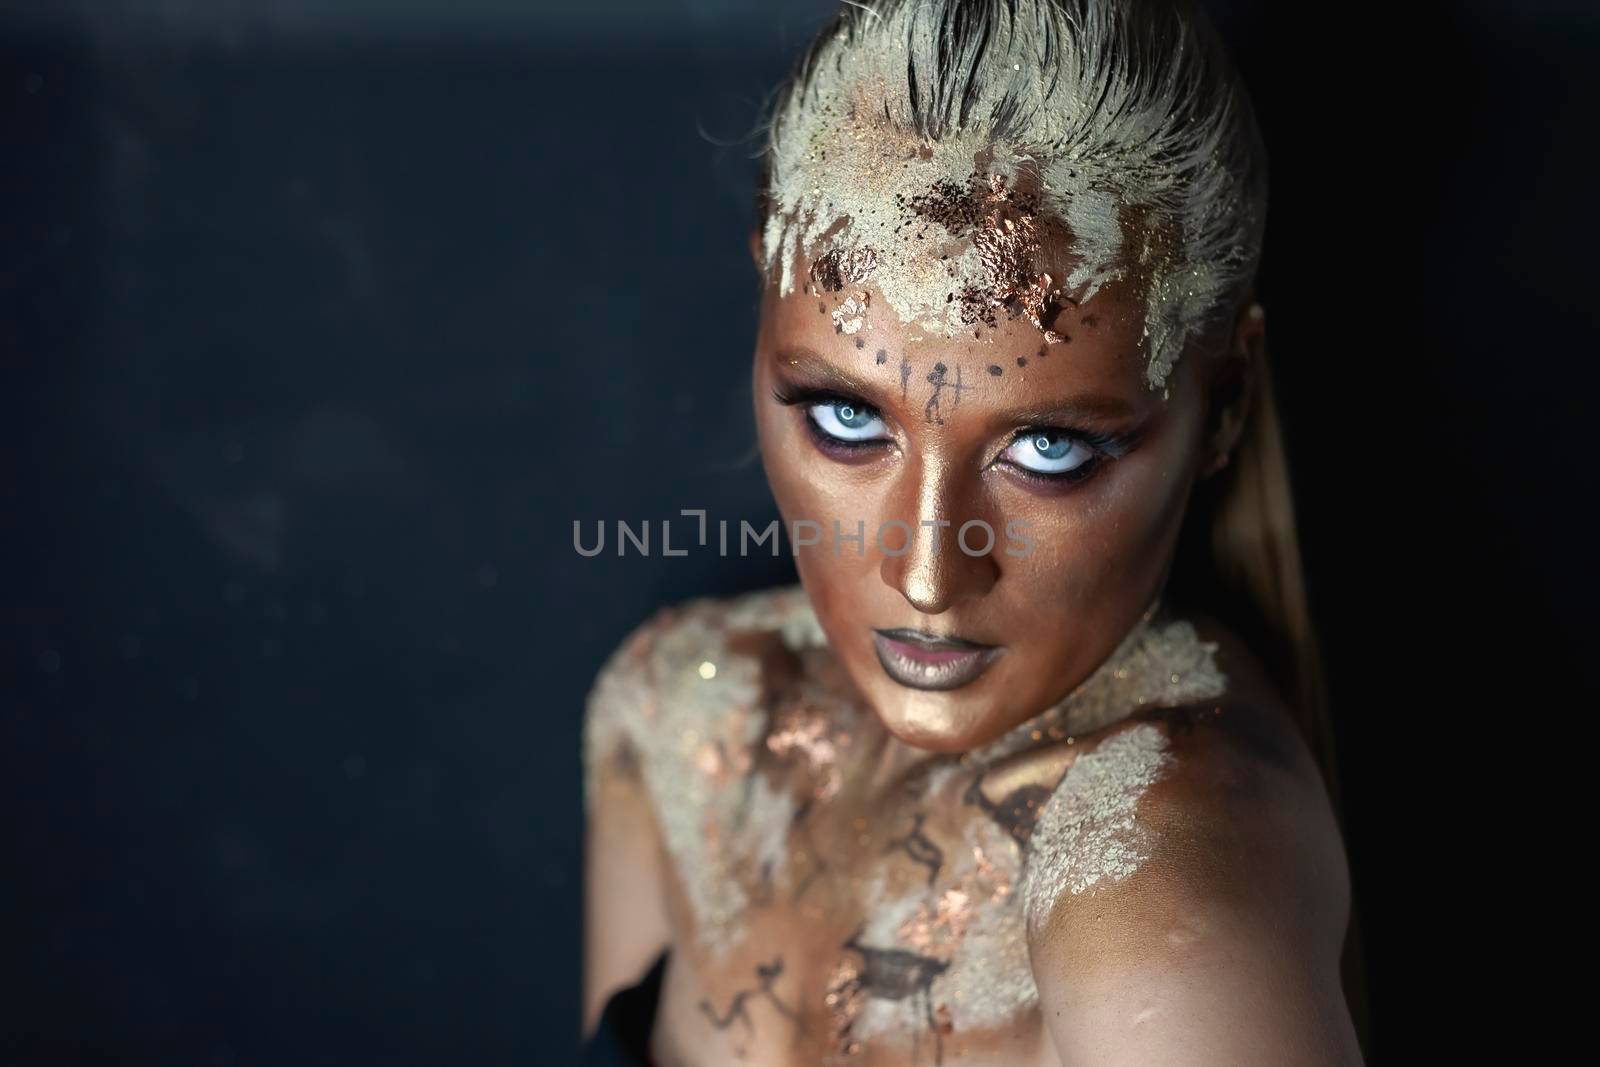 Creative makeup in the style of prehistoric cave painting by Multipedia